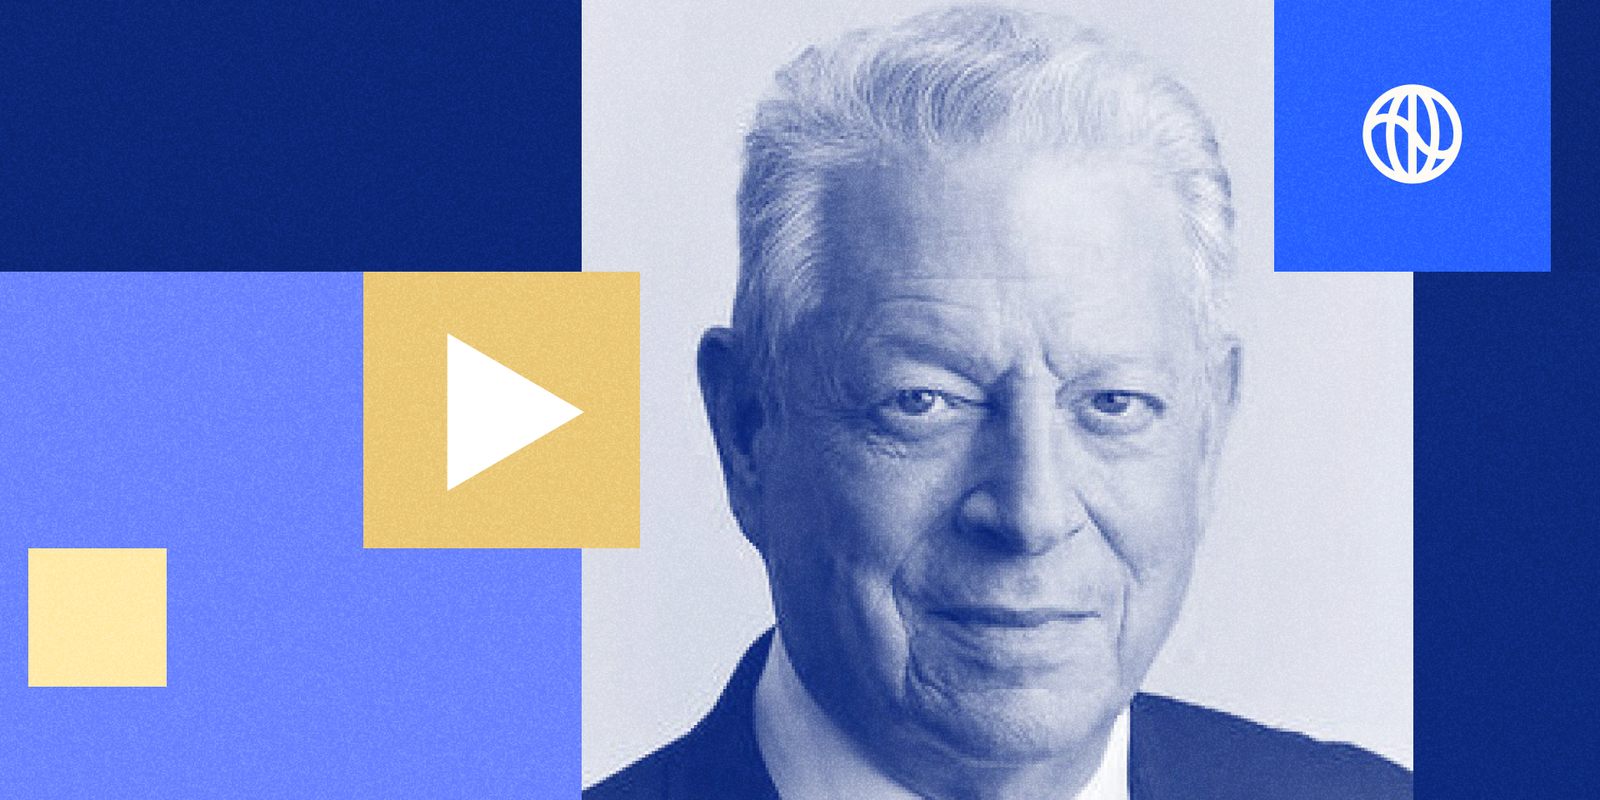 Al Gore on the new era of corporate climate action